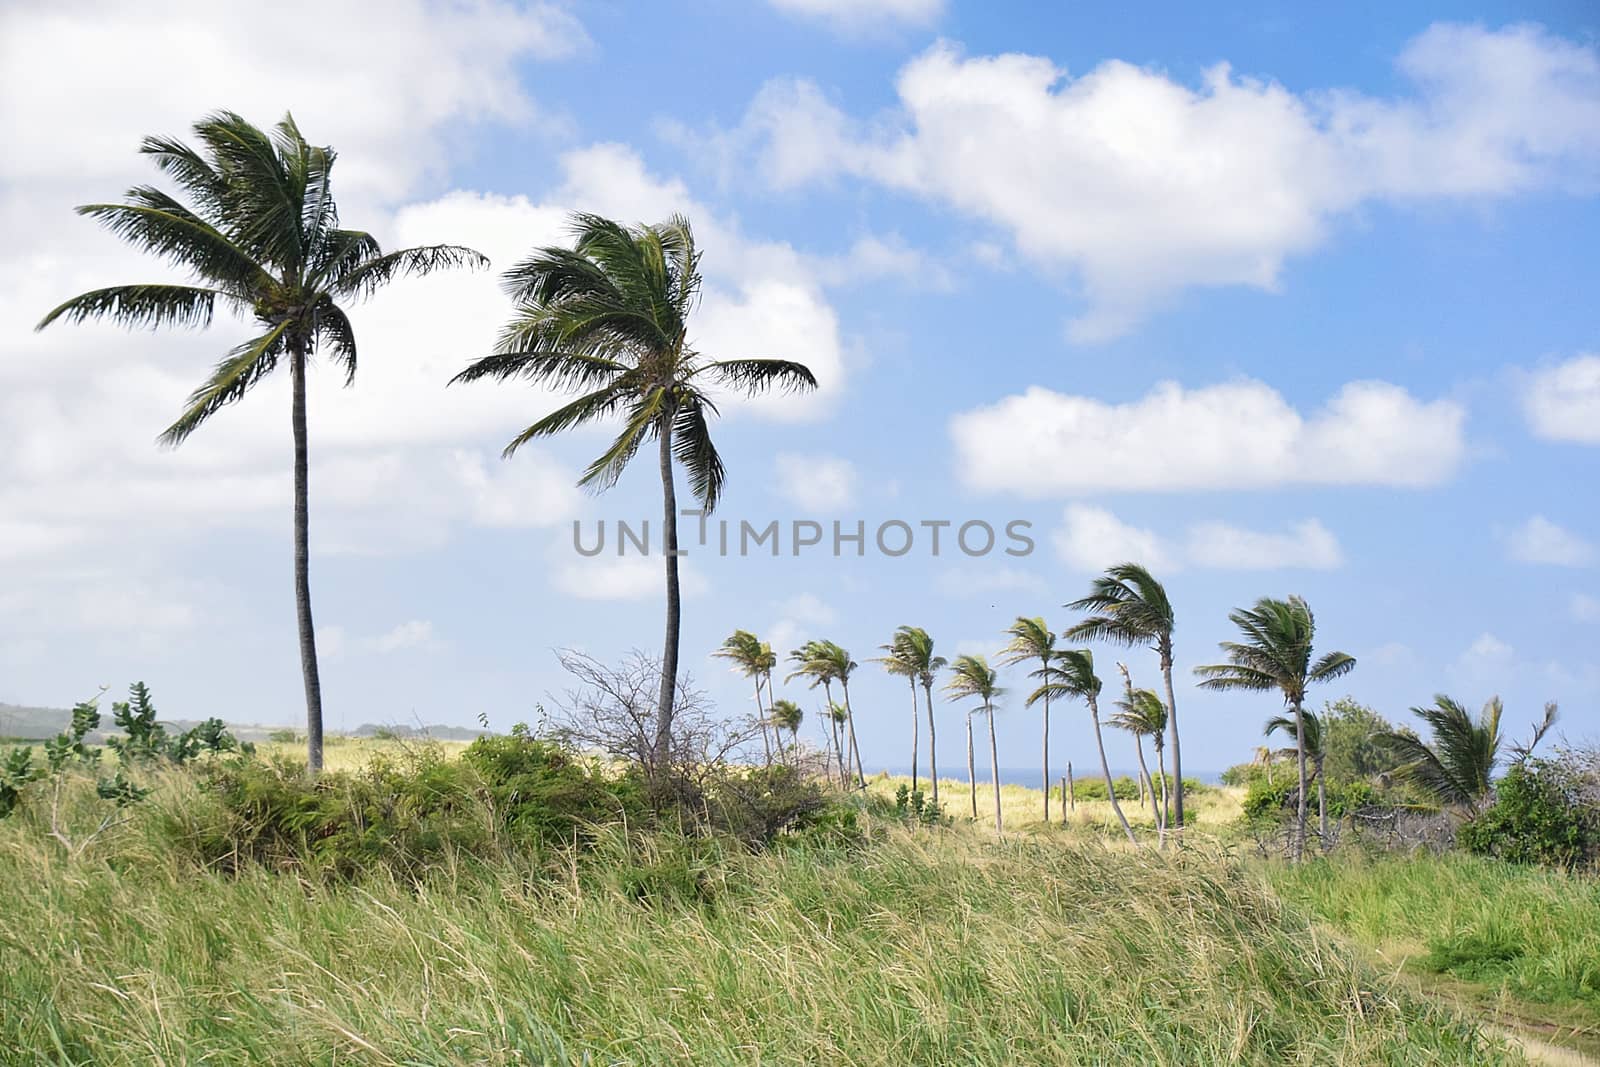 St Kitts, Dec 2014: King plam trees bendng in the wnd on St Kitts Island